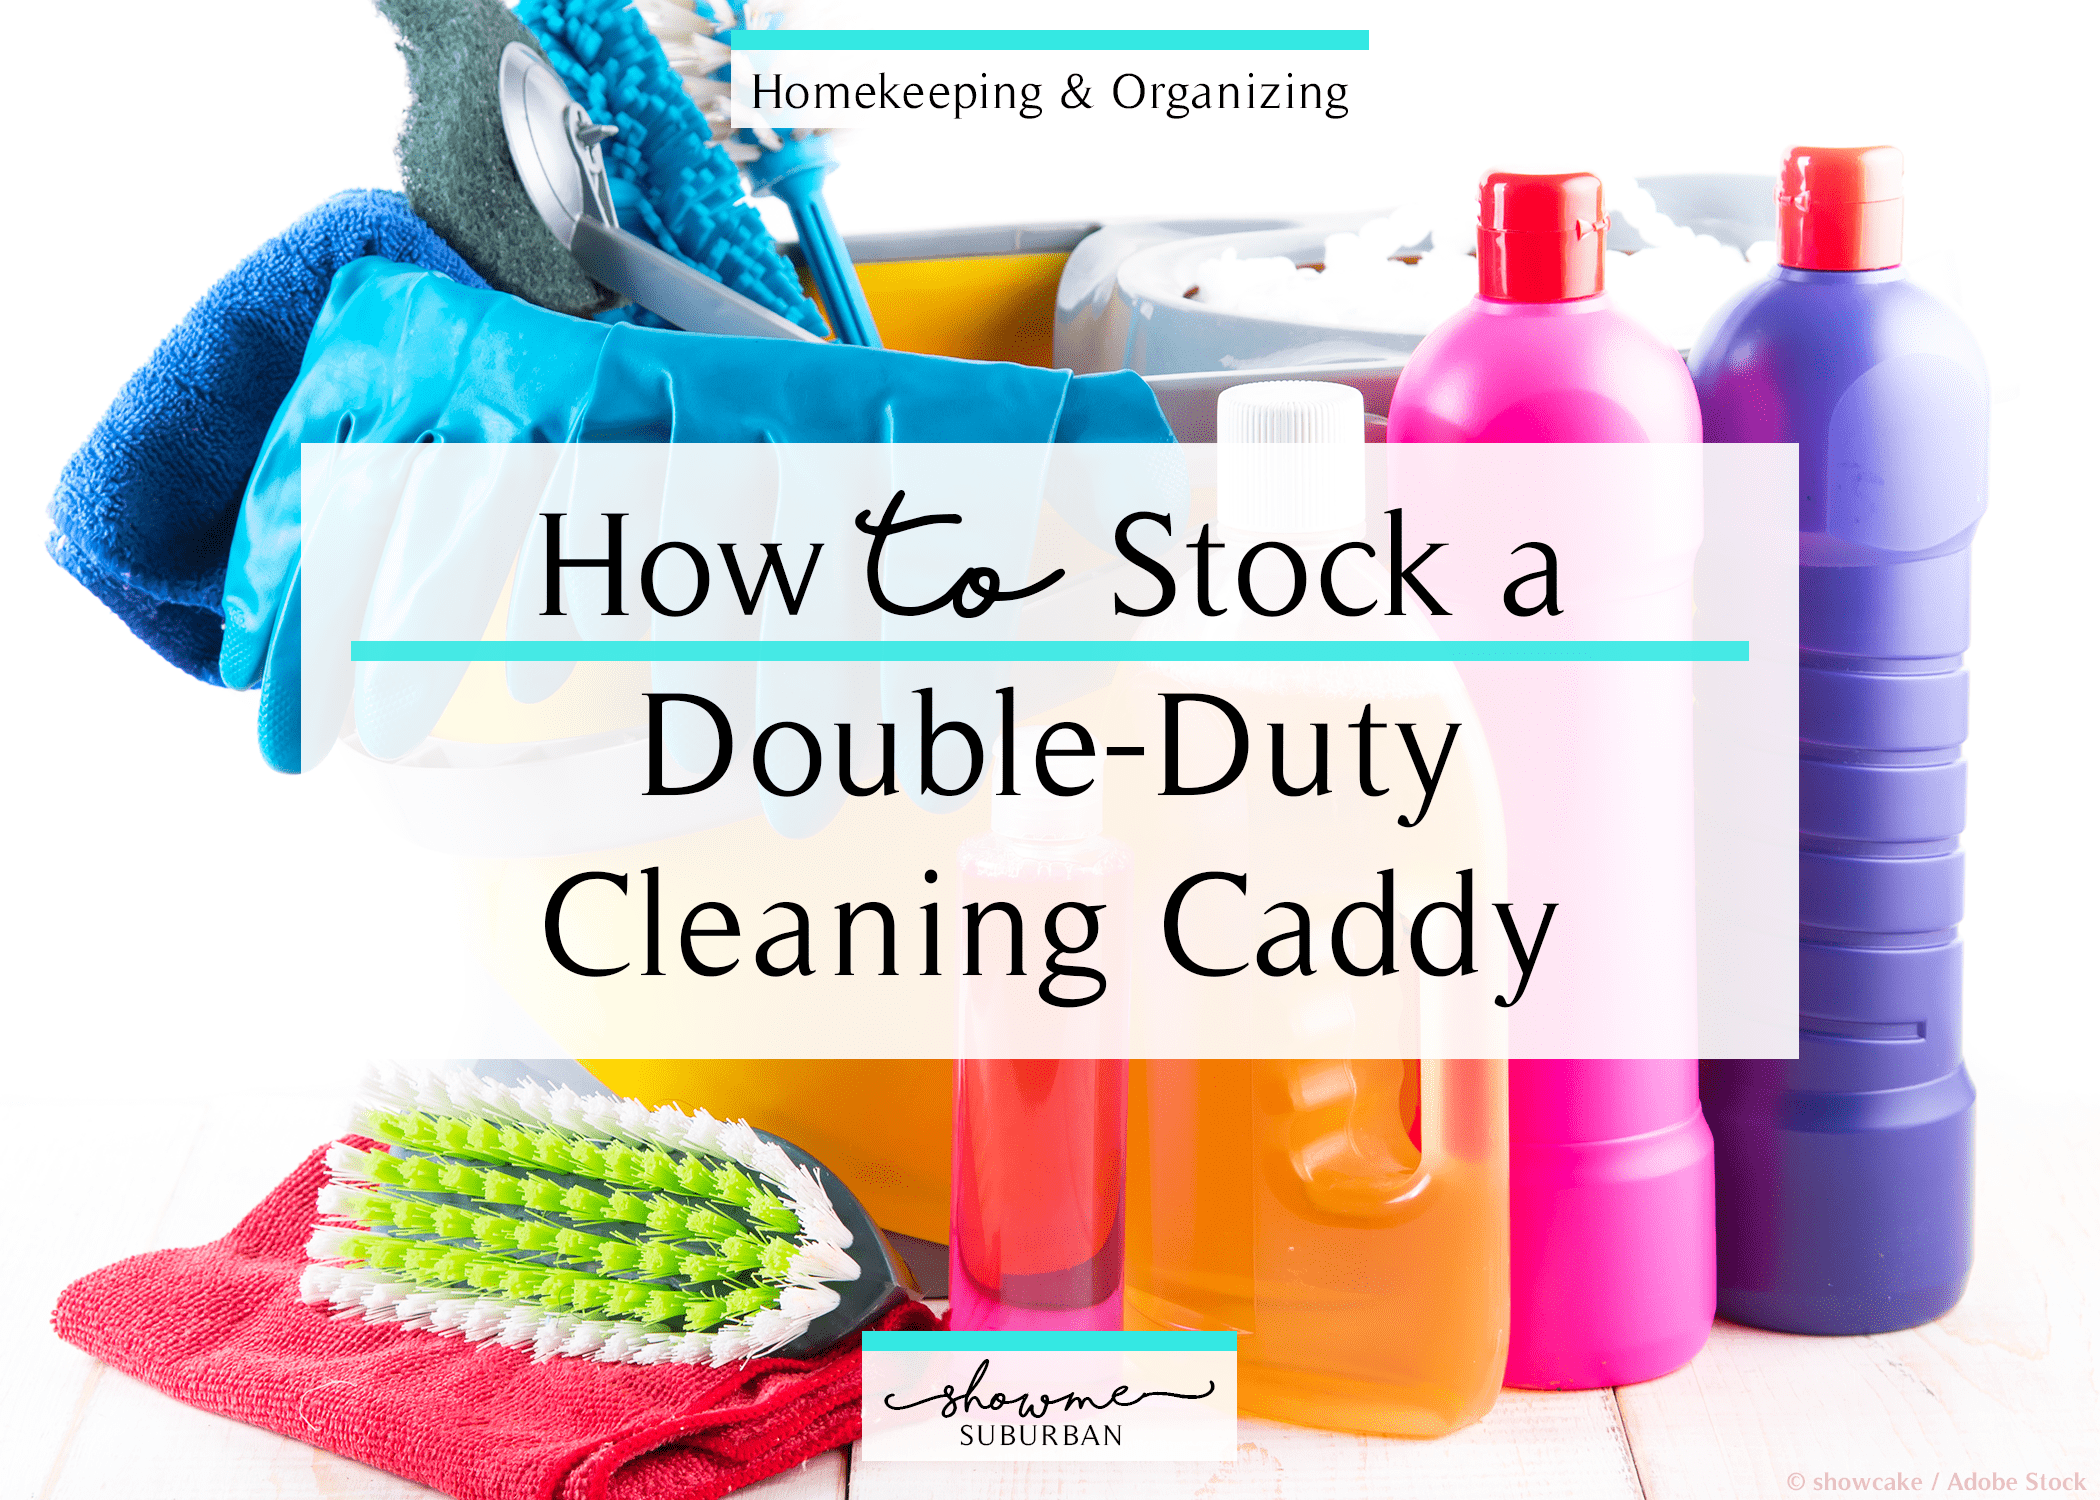 Finally bought a cleaning caddy! : r/CleaningTips